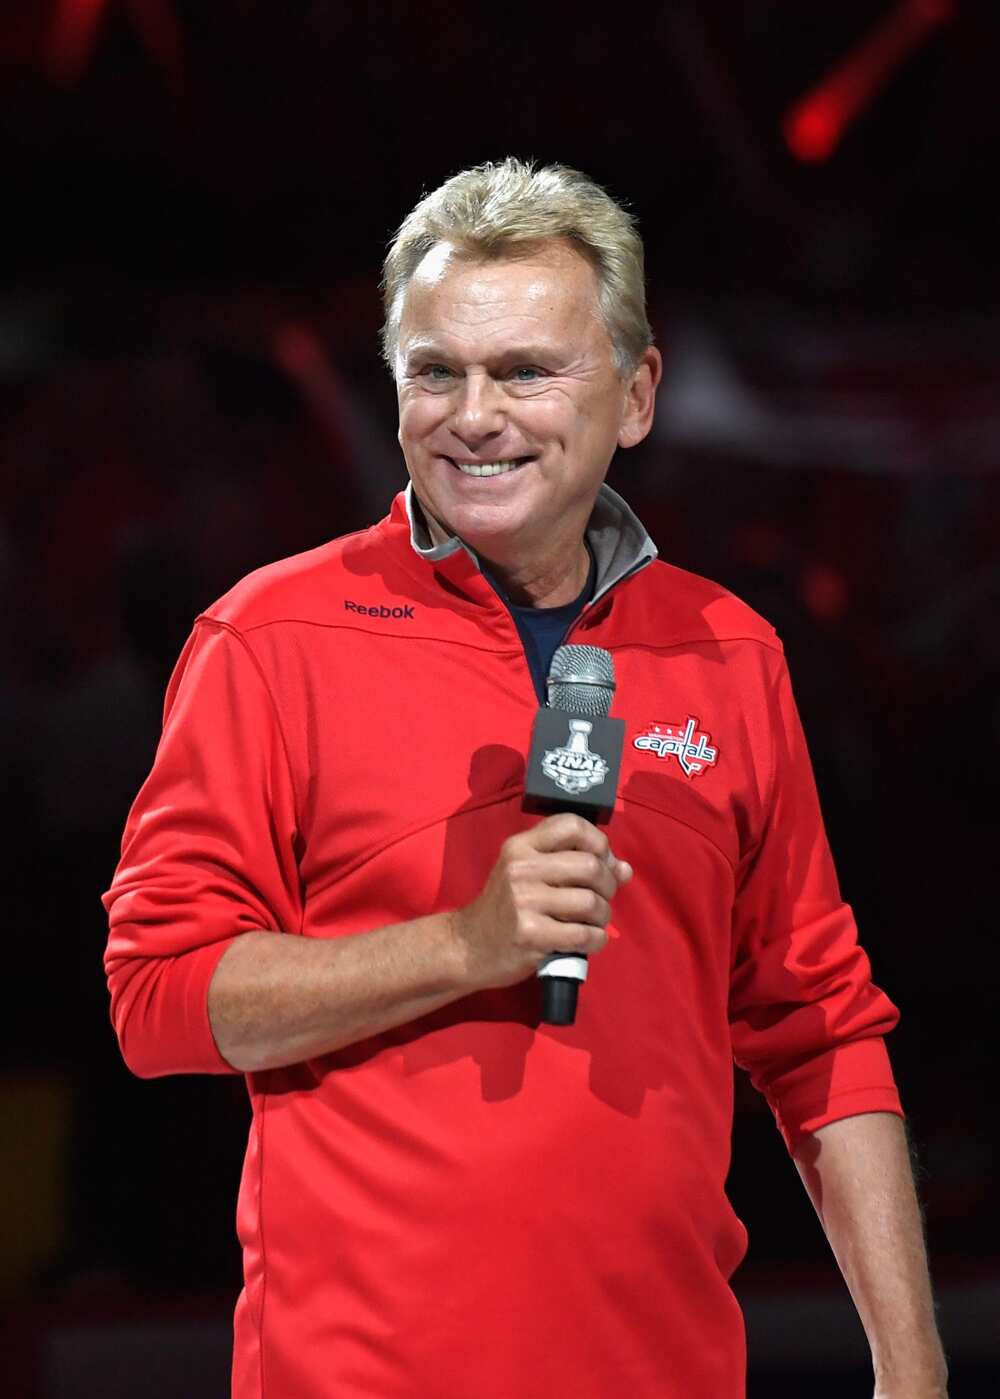 Who is Pat Sajak married to?